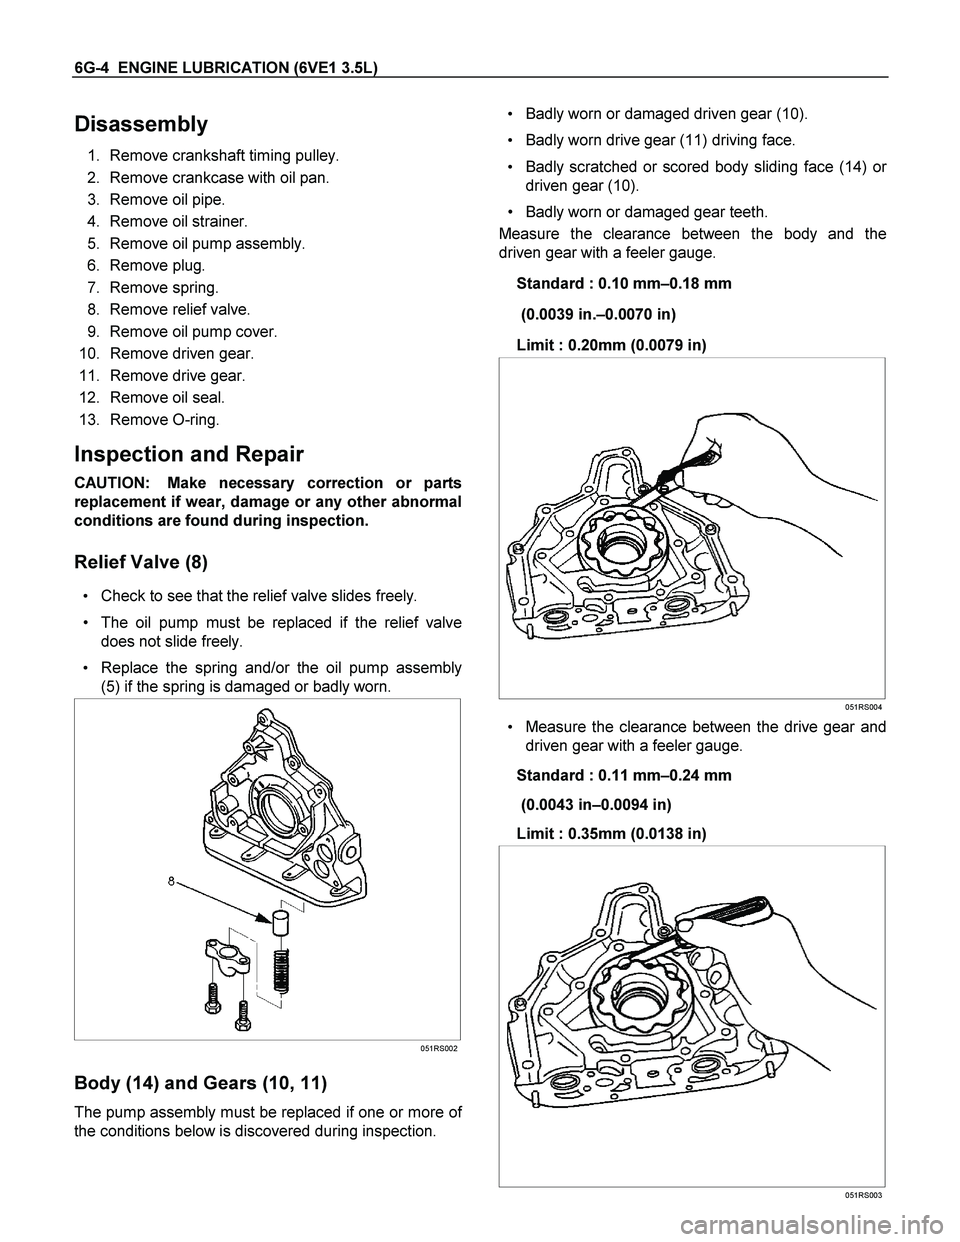 ISUZU TF SERIES 2004  Workshop Manual 6G-4  ENGINE LUBRICATION (6VE1 3.5L) 
Disassembly 
1.  Remove crankshaft timing pulley. 
2.  Remove crankcase with oil pan. 
3.  Remove oil pipe. 
4.  Remove oil strainer. 
5.  Remove oil pump assembl